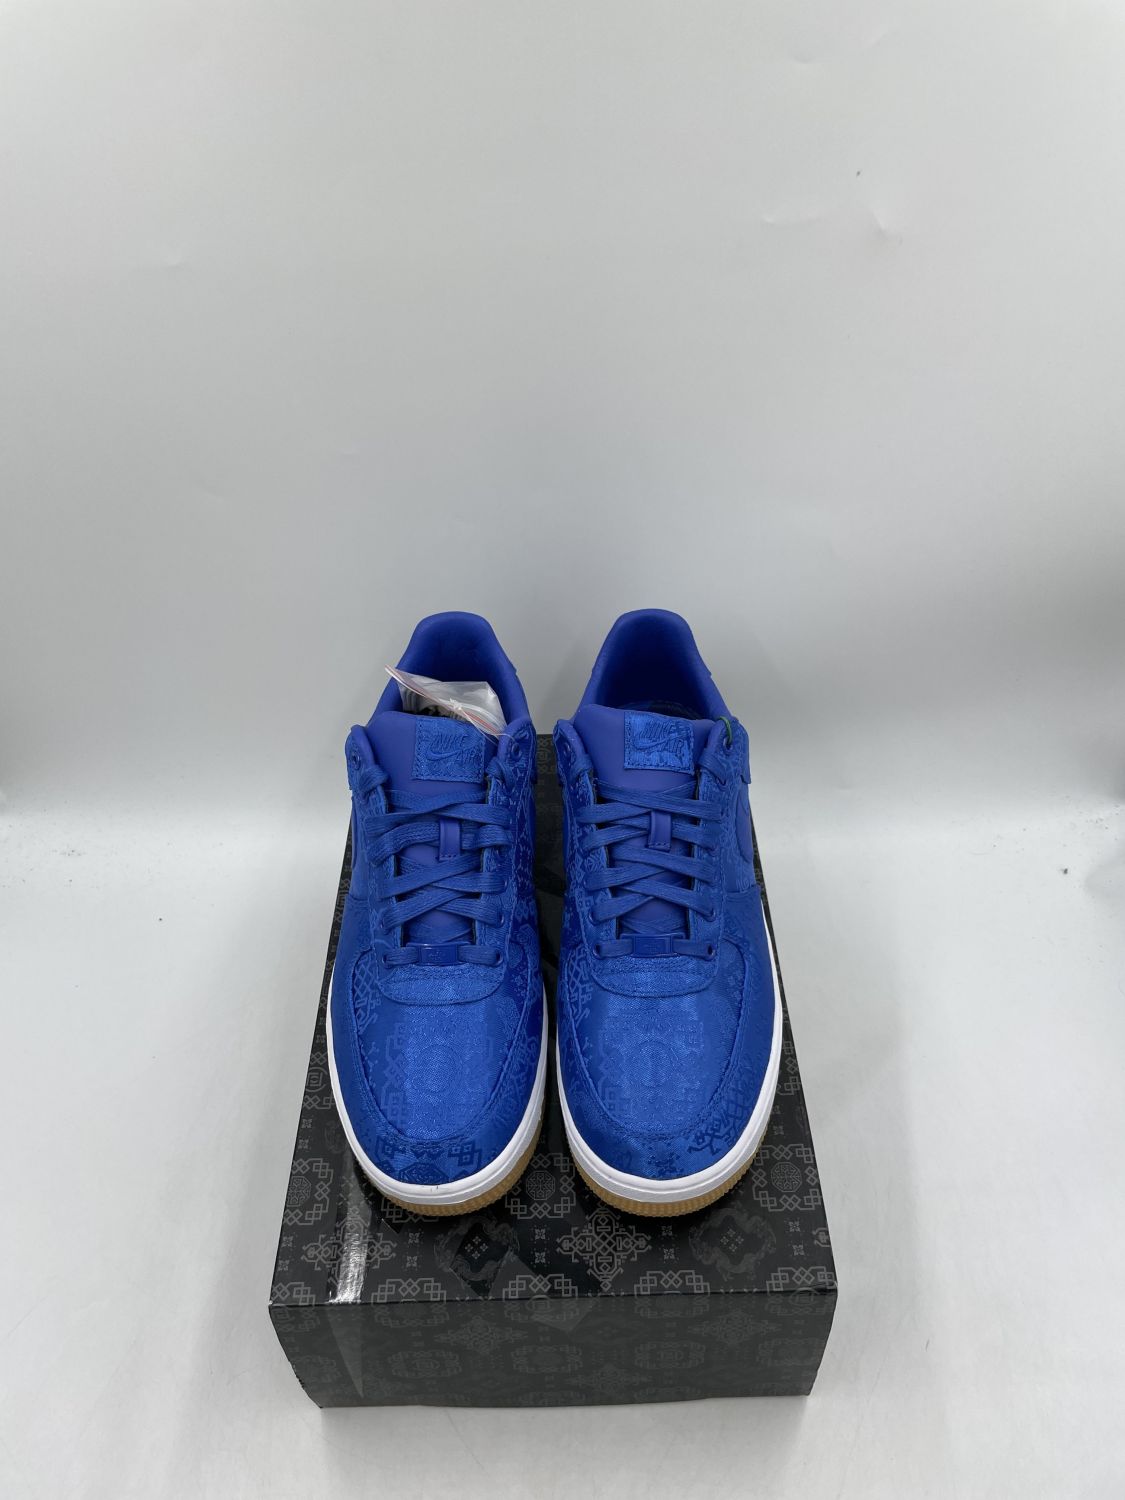 Nike Air Force 1 Low CLOT Blue Silk | AfterMarket